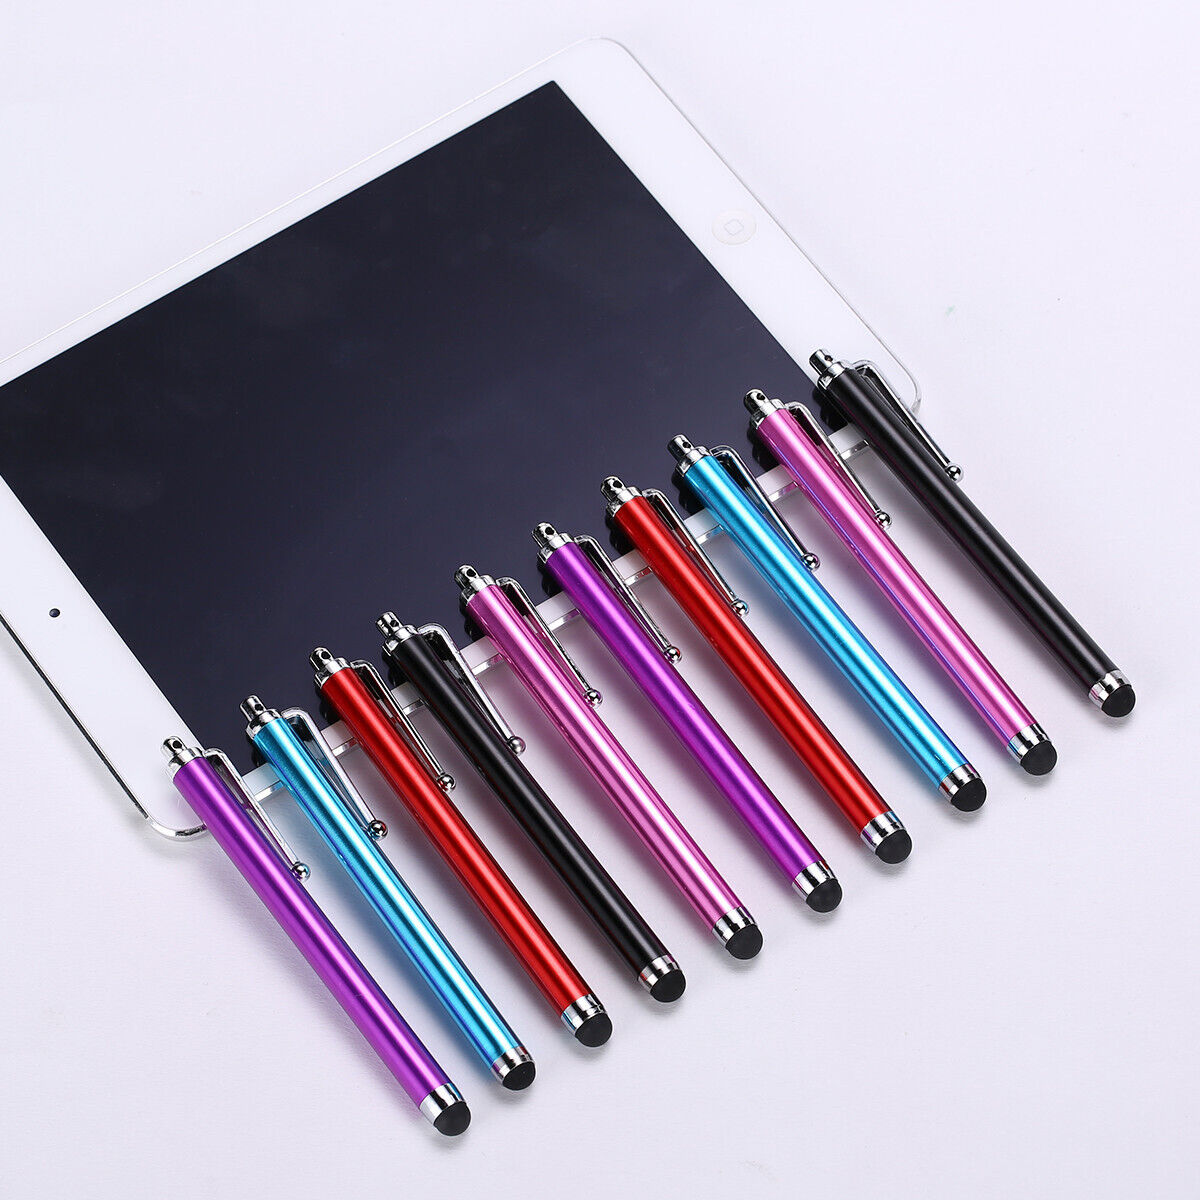 10 Capacitive Touch Screen Stylus Pen Universal For iPhone iPad Samsung Tablet Ombar Universal Touch Screen Stylus/Pen - фотография #8